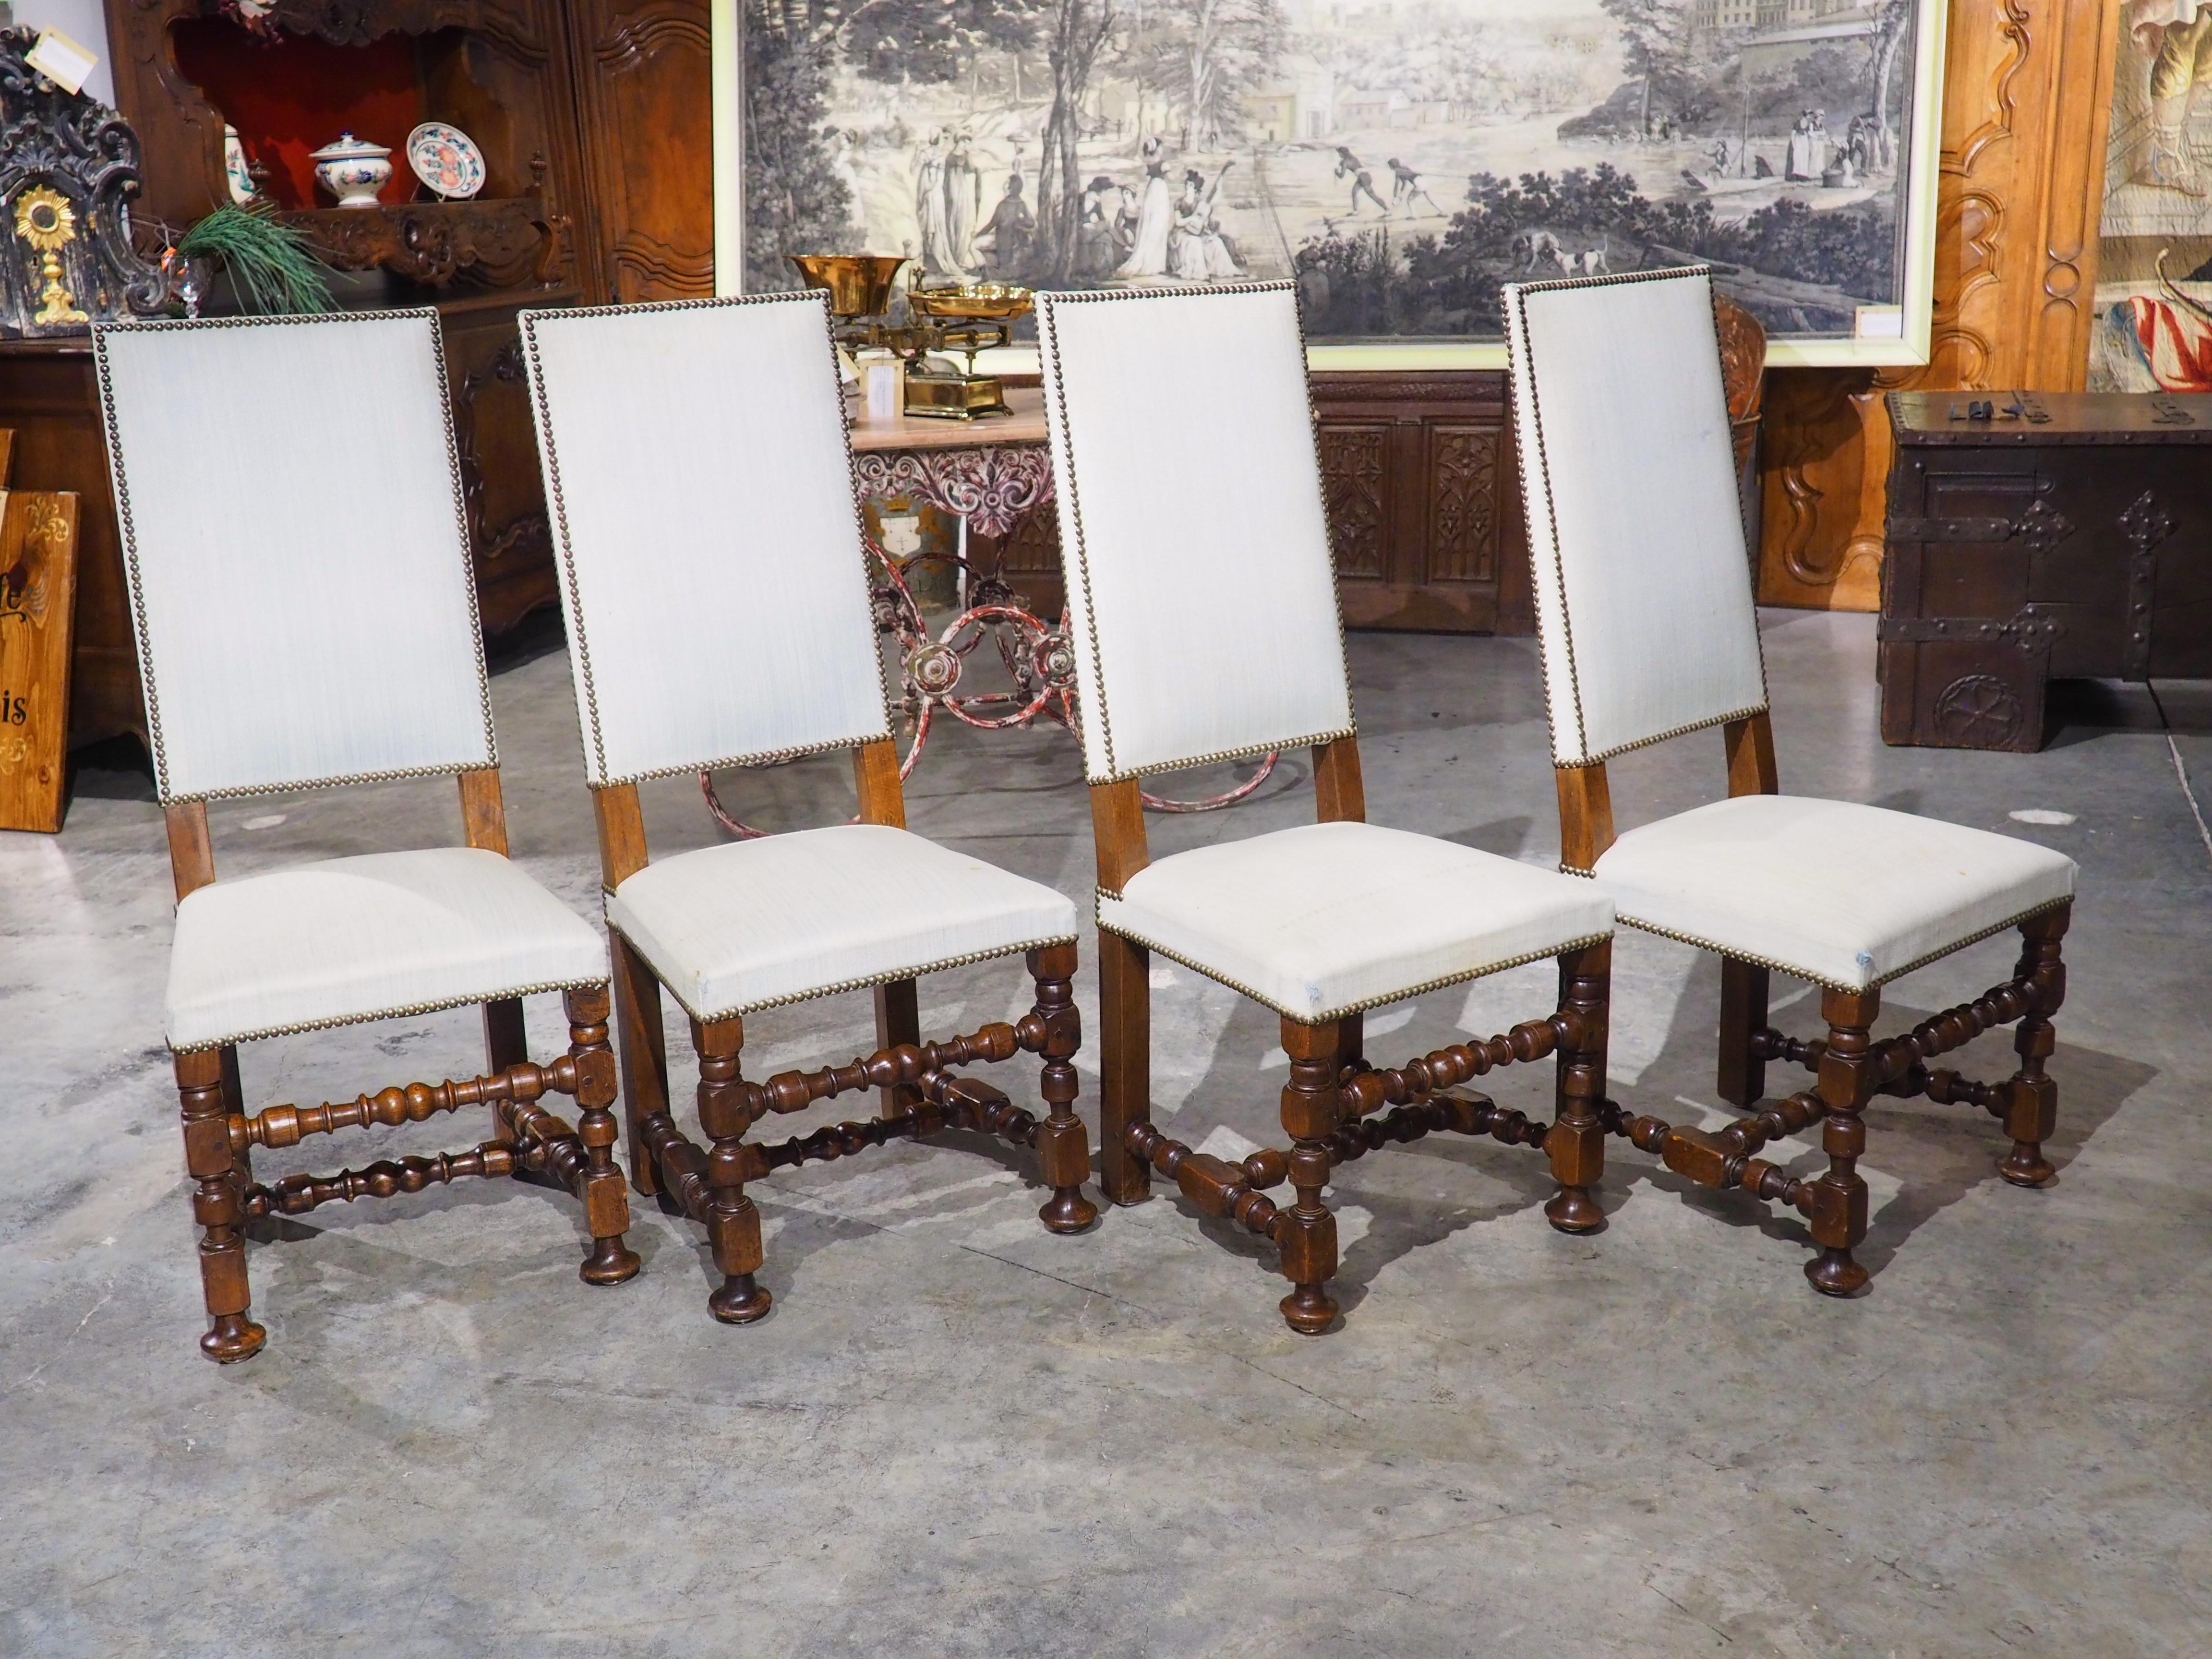 Produced in France, circa 1920, this set of eight oak dining chairs are in the style of Louis XIV. The straight backs and seats made from simple sets of turned and block carved wood make for a style that is still relevant and easy to work with in